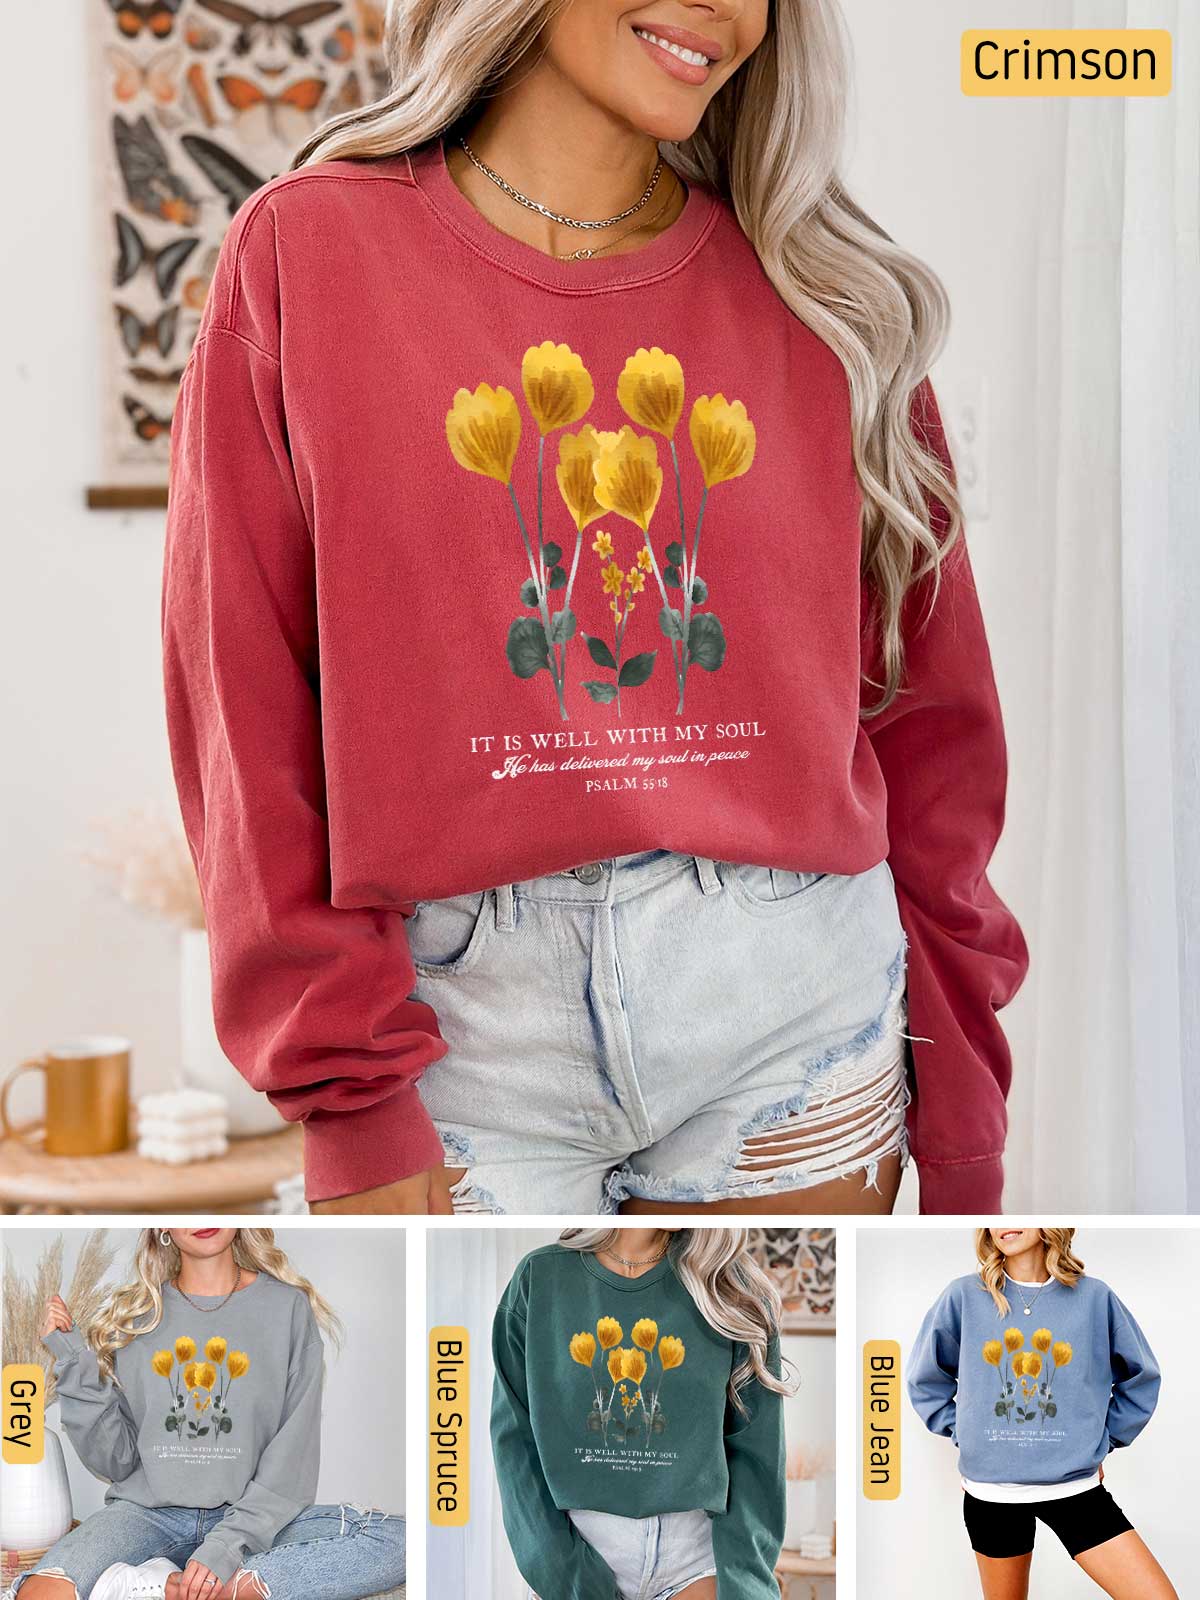 a woman wearing a red sweatshirt with yellow flowers on it